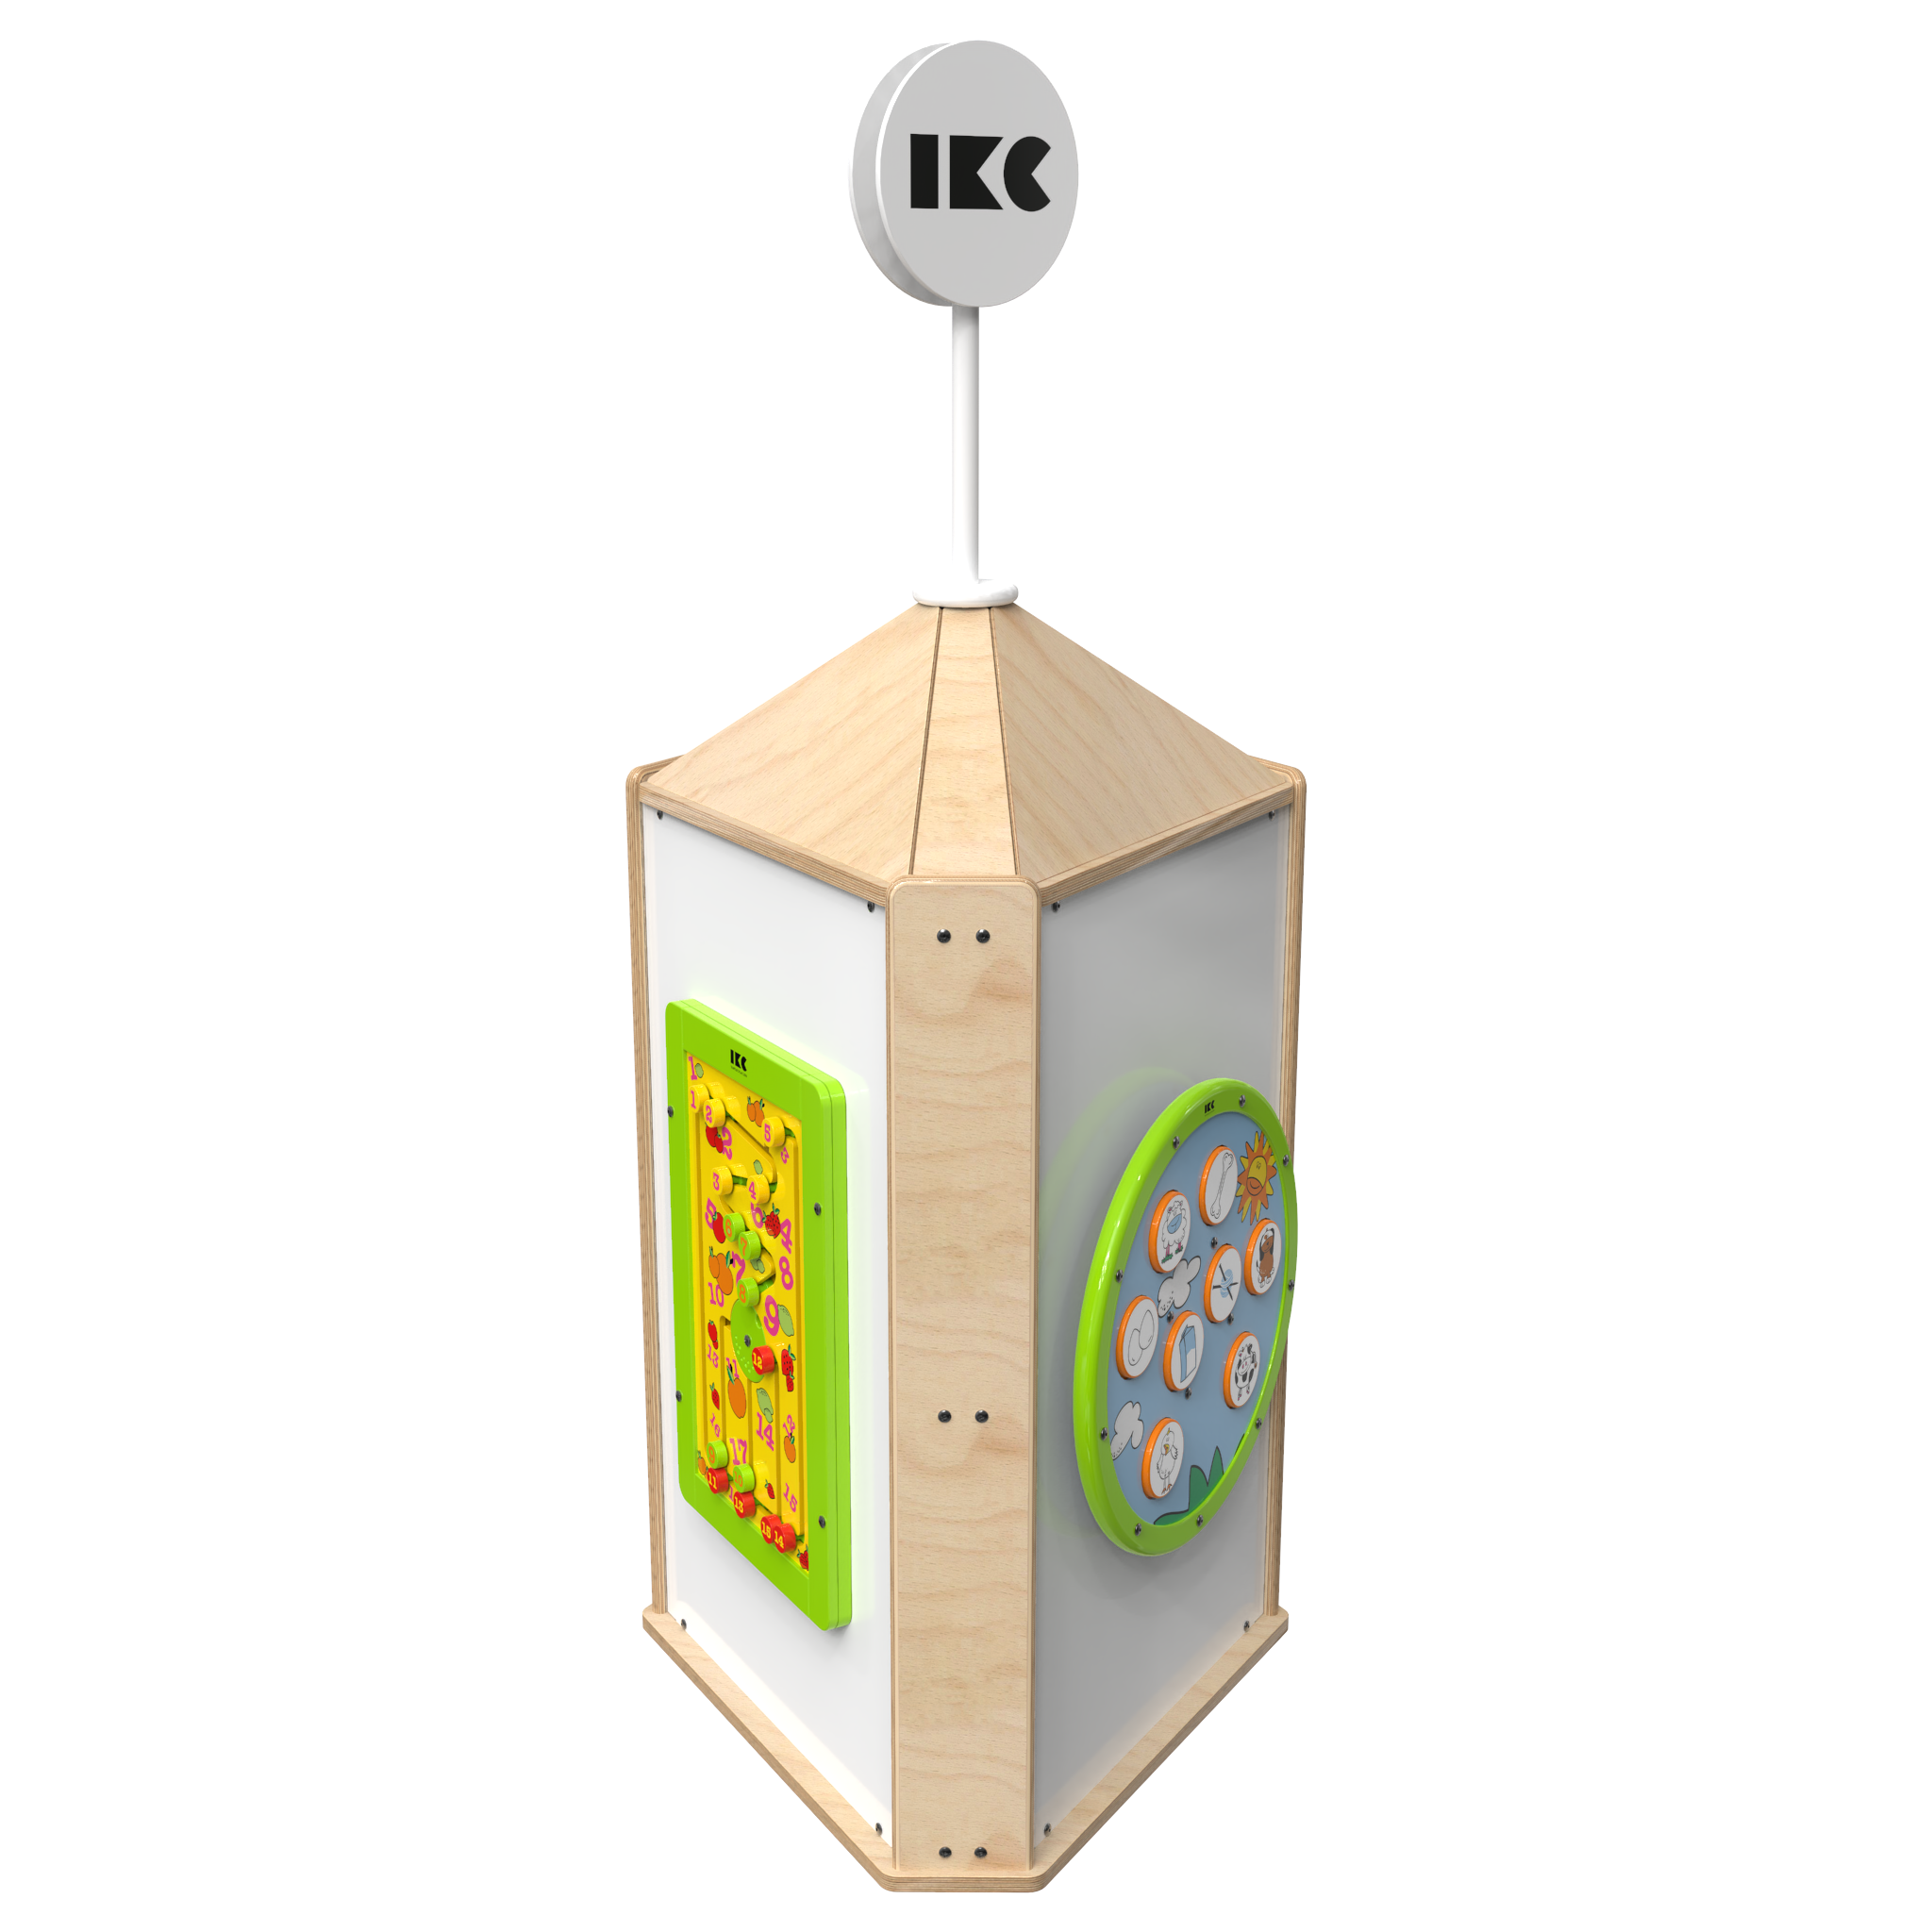 This image shows an interactive play system Playtower touch wood